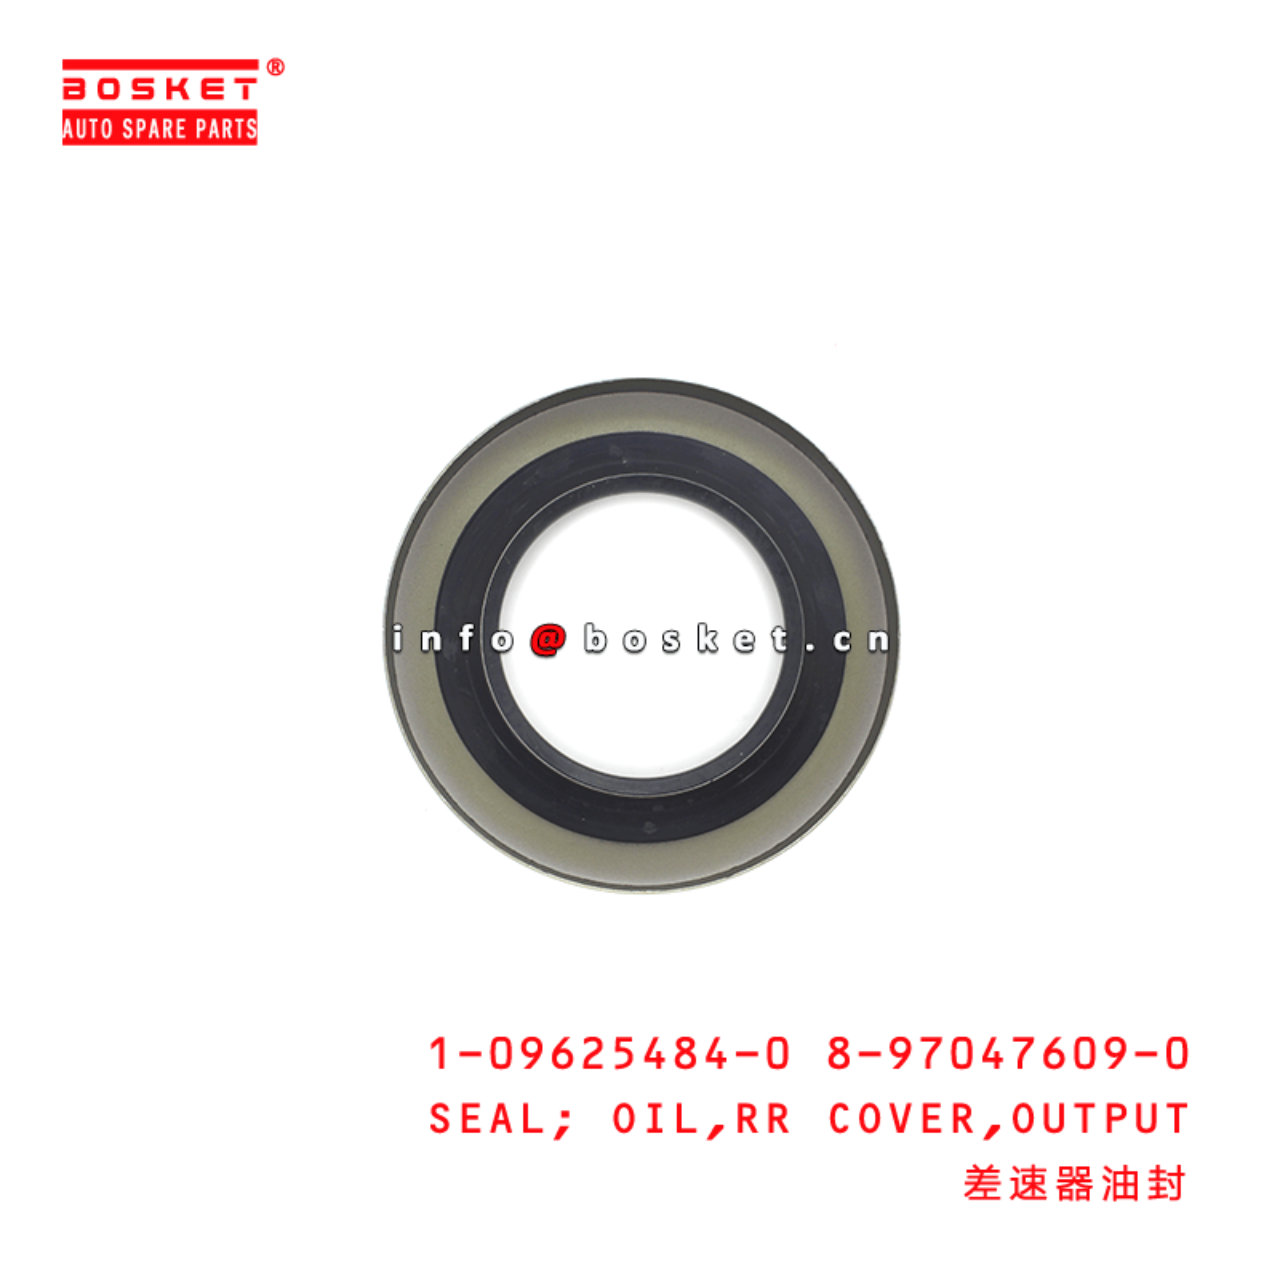 1-09625484-0 8-97047609-0 Output Rear Cover Oil Seal 1096254840 8970476090 Suitable for ISUZU ELF 4H